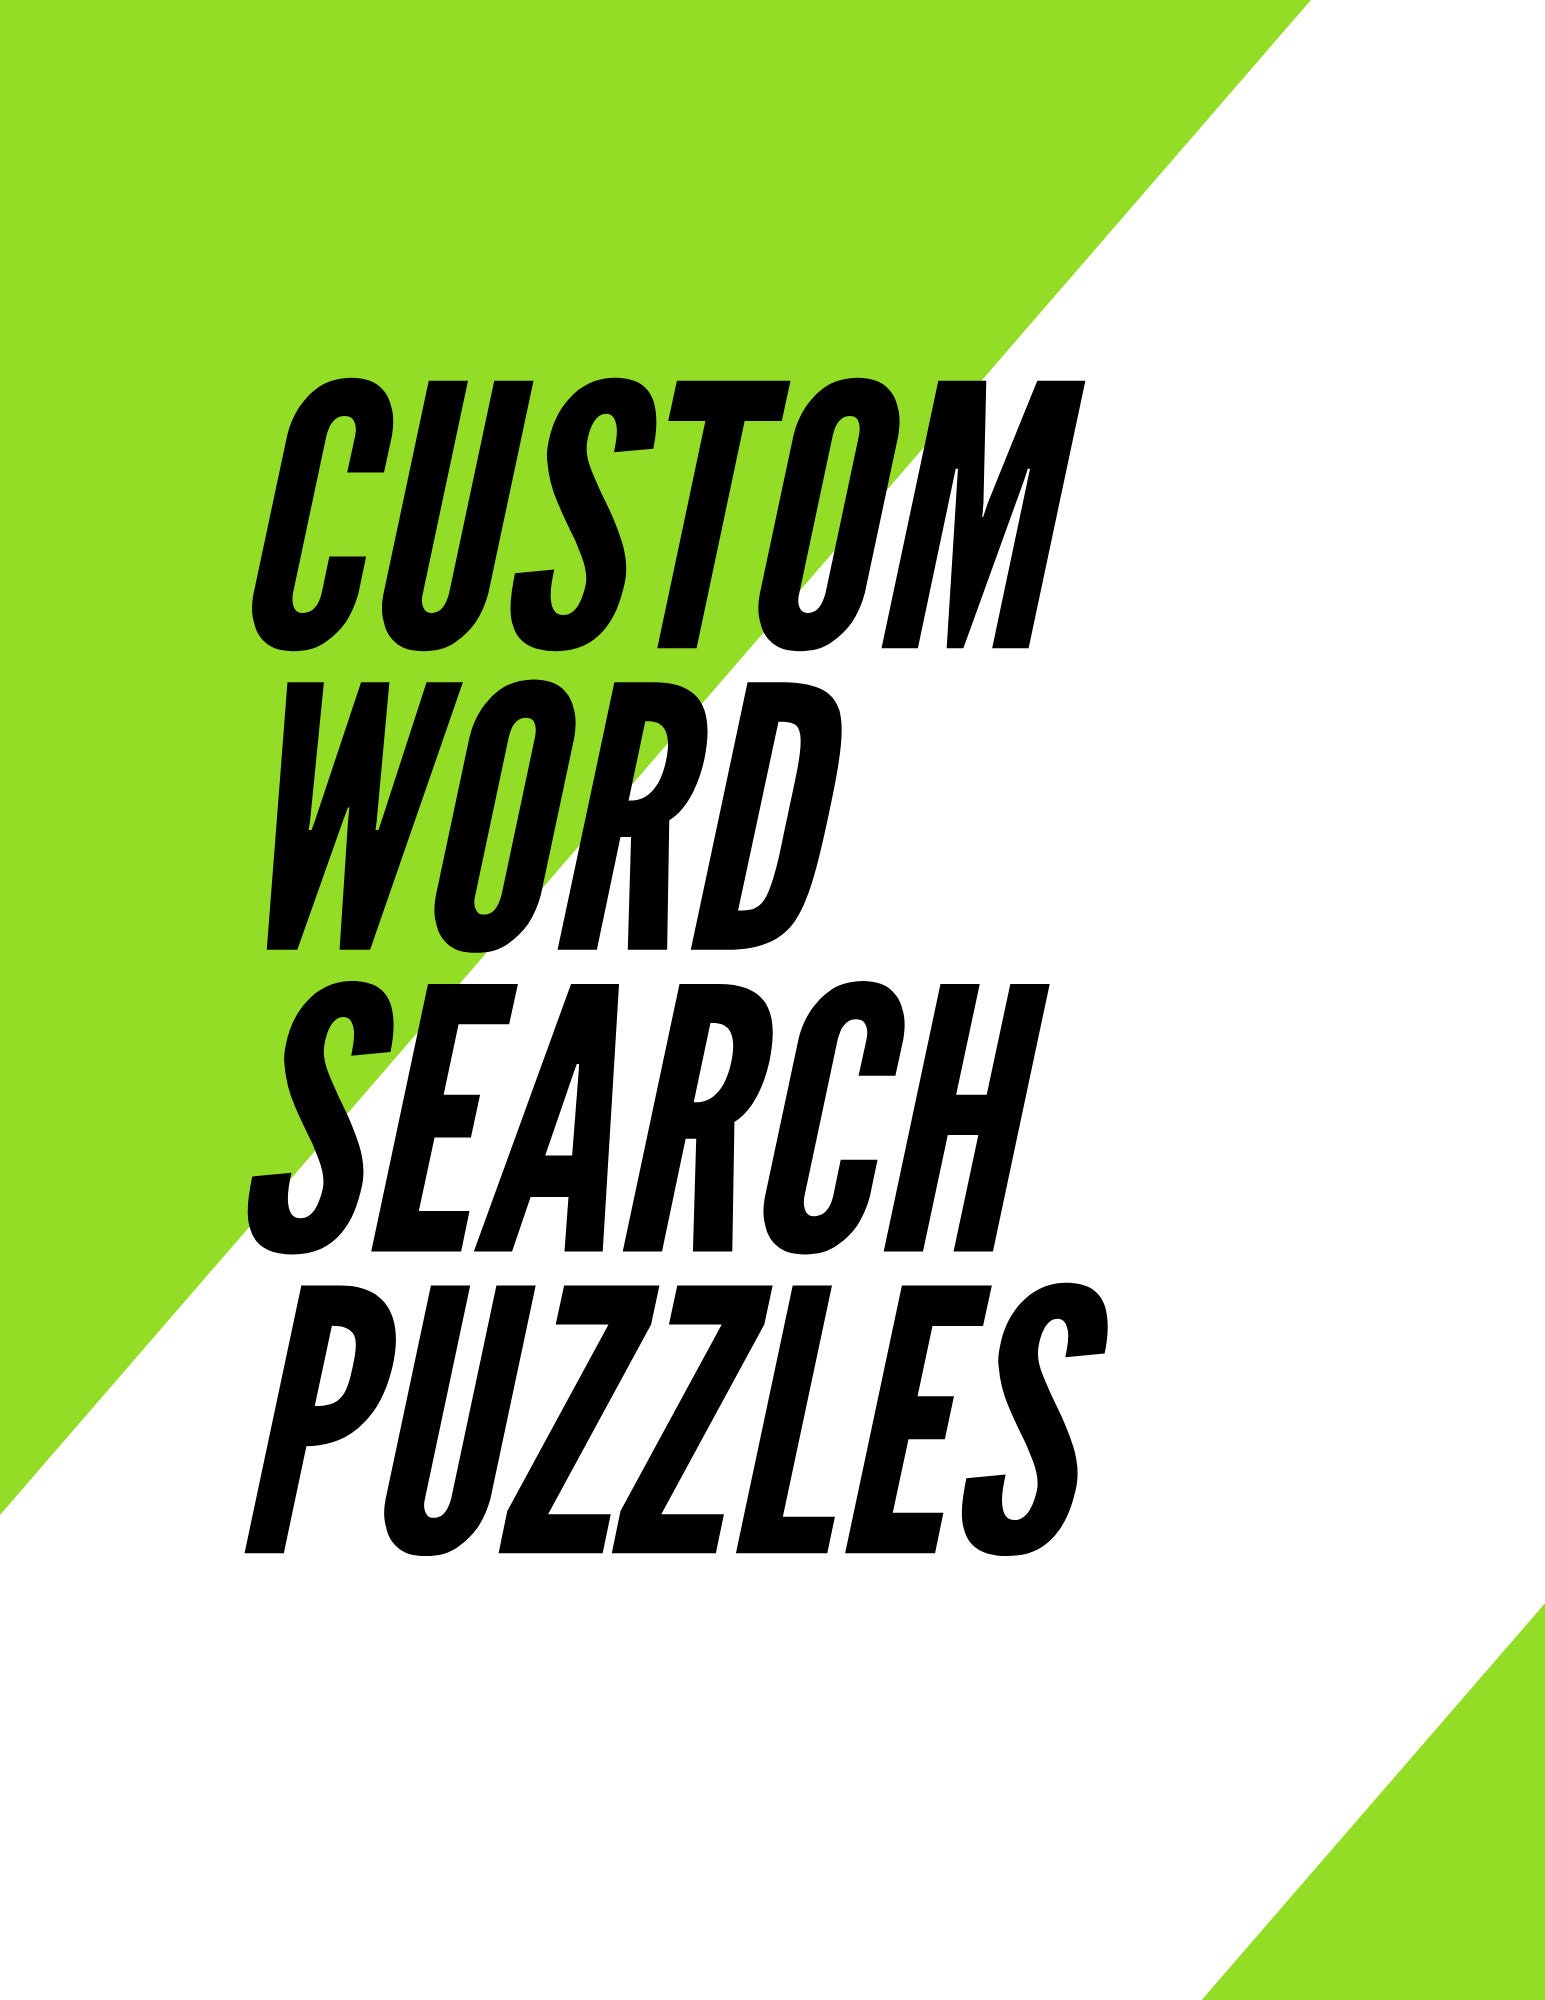 custom-word-search-puzzles-custom-word-search-puzzles-books-printable